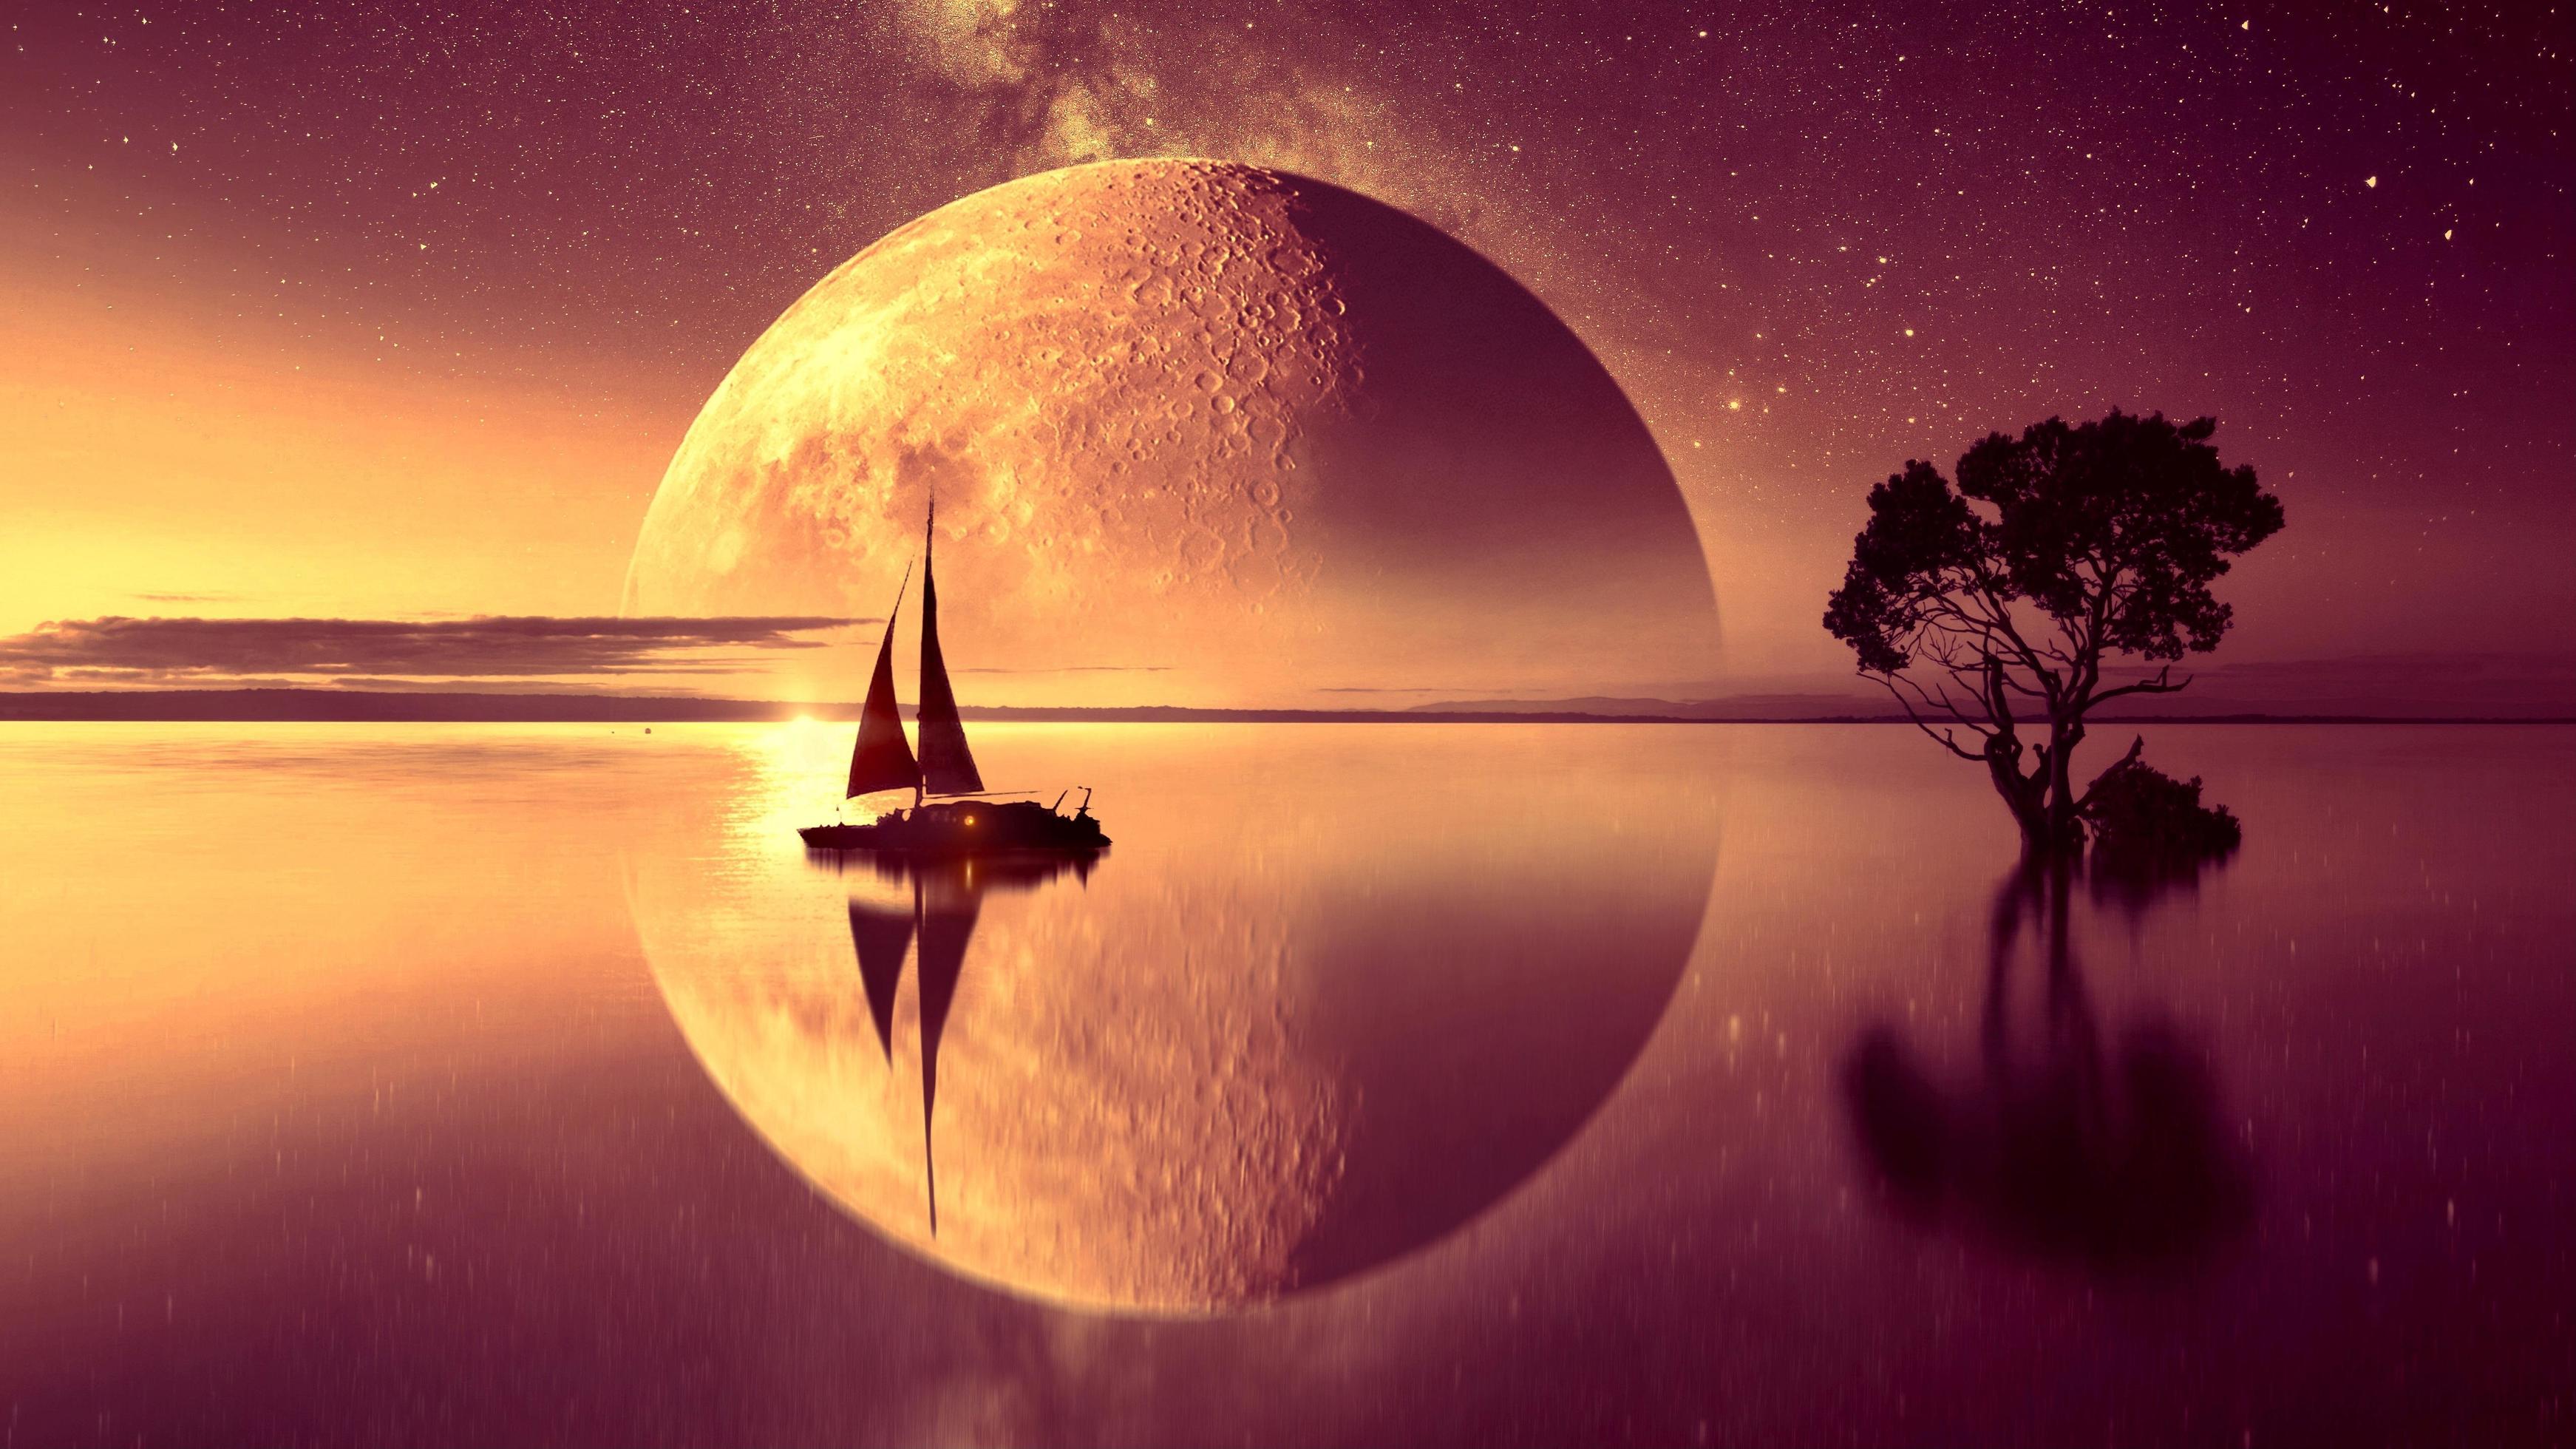 Fantastic Moon Magic Light and Water Boat With Tree Wallpaper 6671766 Stock  Photo at Vecteezy